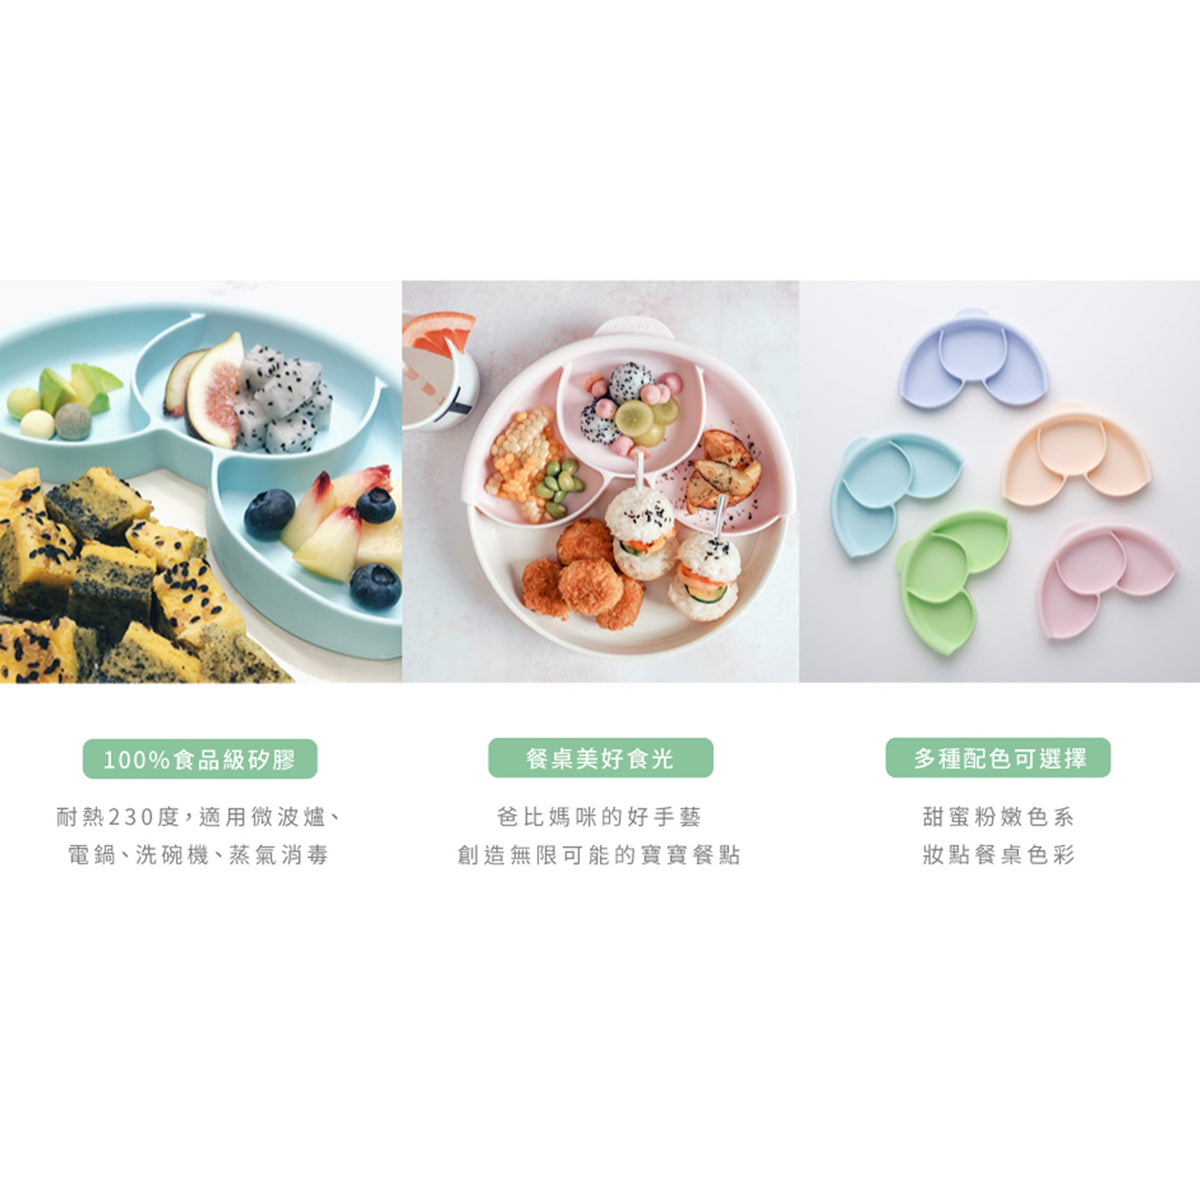 miniware-healthy-meal-set-pla-smart-divider-suction-plate-in-vanilla-+-silicone-divider-in-peach- (3)